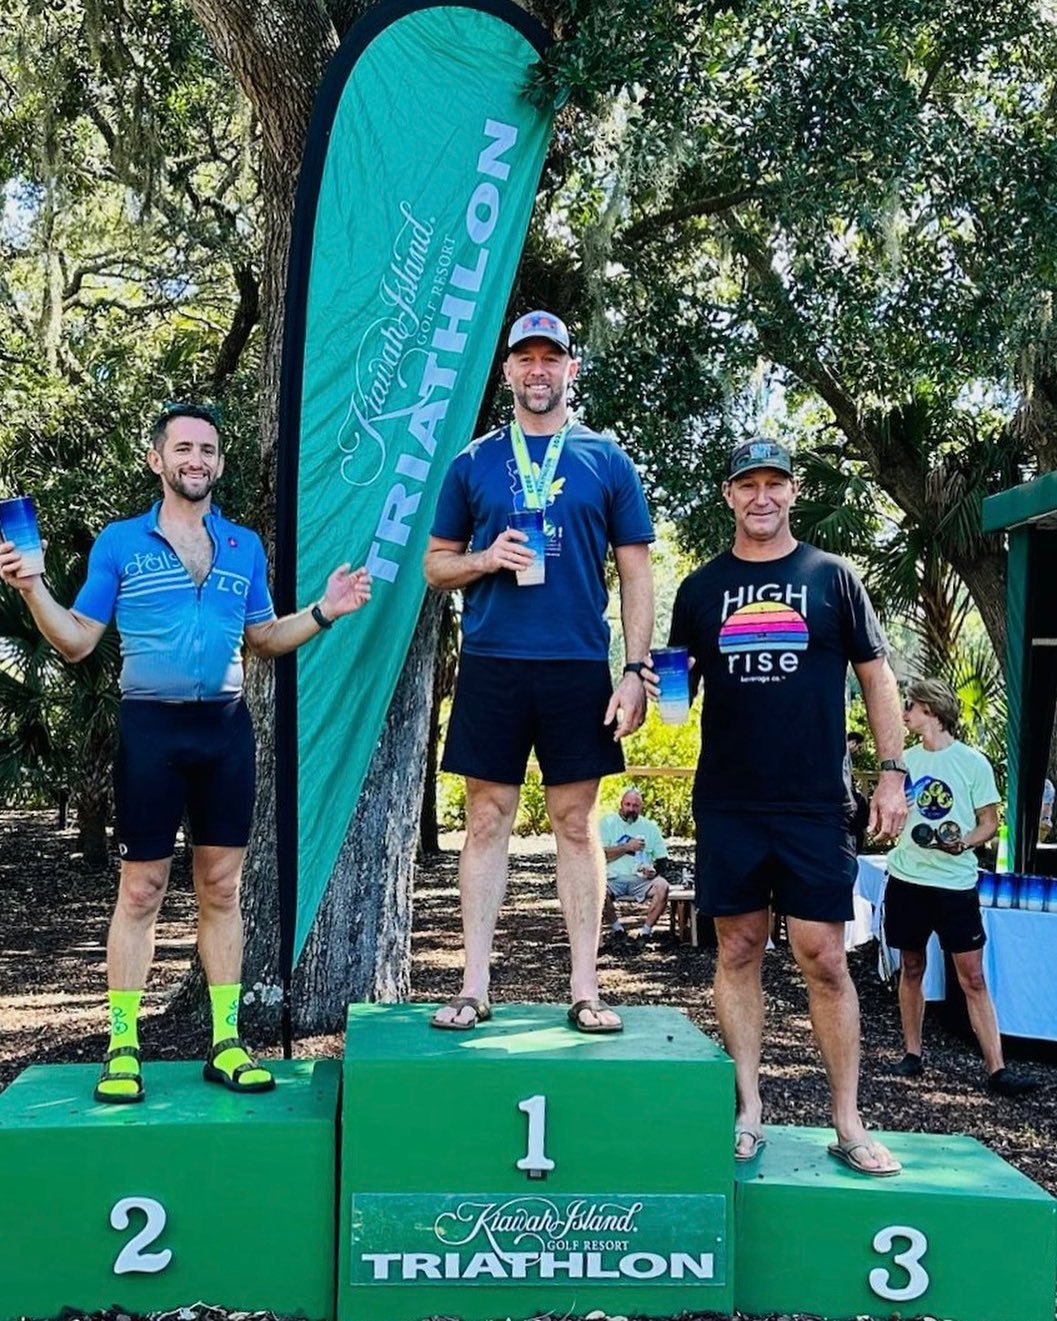 it must&rsquo;ve been the #pizzawatts! the pizza man killed it today at his first triathlon! 29th overall and 2nd in his age group. way to go, nic! 🏃&zwj;♂️🏊&zwj;♀️ 🚴🏻 🍕 #LCR #lowcountryracing #ridebikeschs #pizzawatts #dalspizza #hellmanfinanci